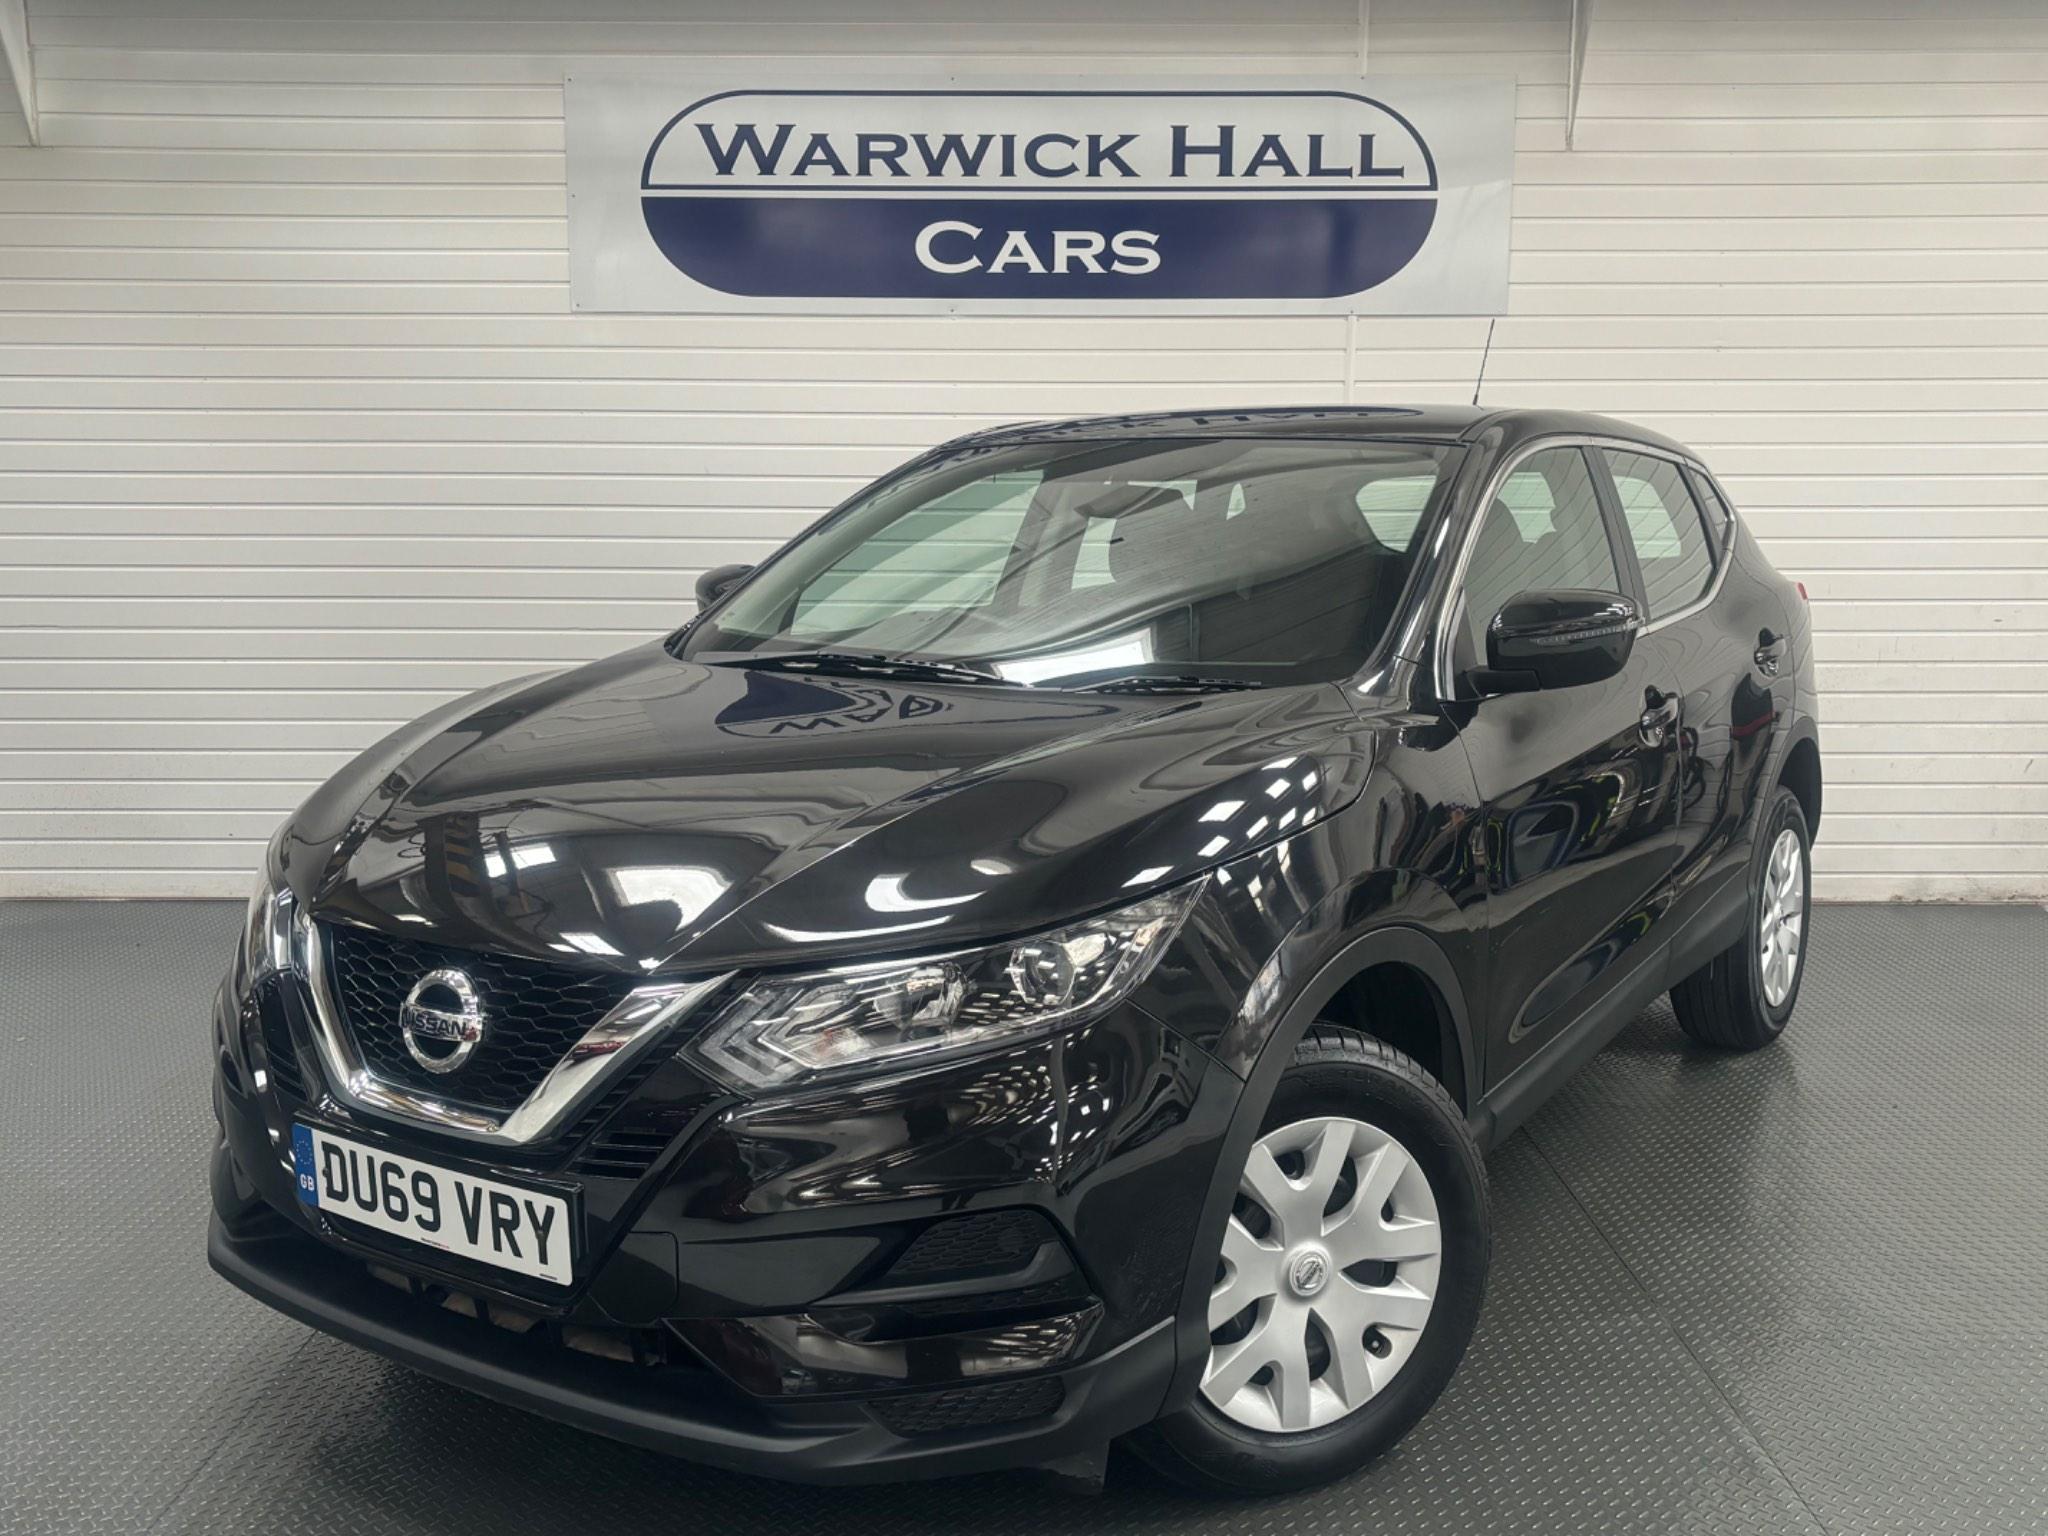 For Sale Nissan Qashqai 1.5 dCi Visia Euro 6 (s/s) 5dr in Greater Manchester